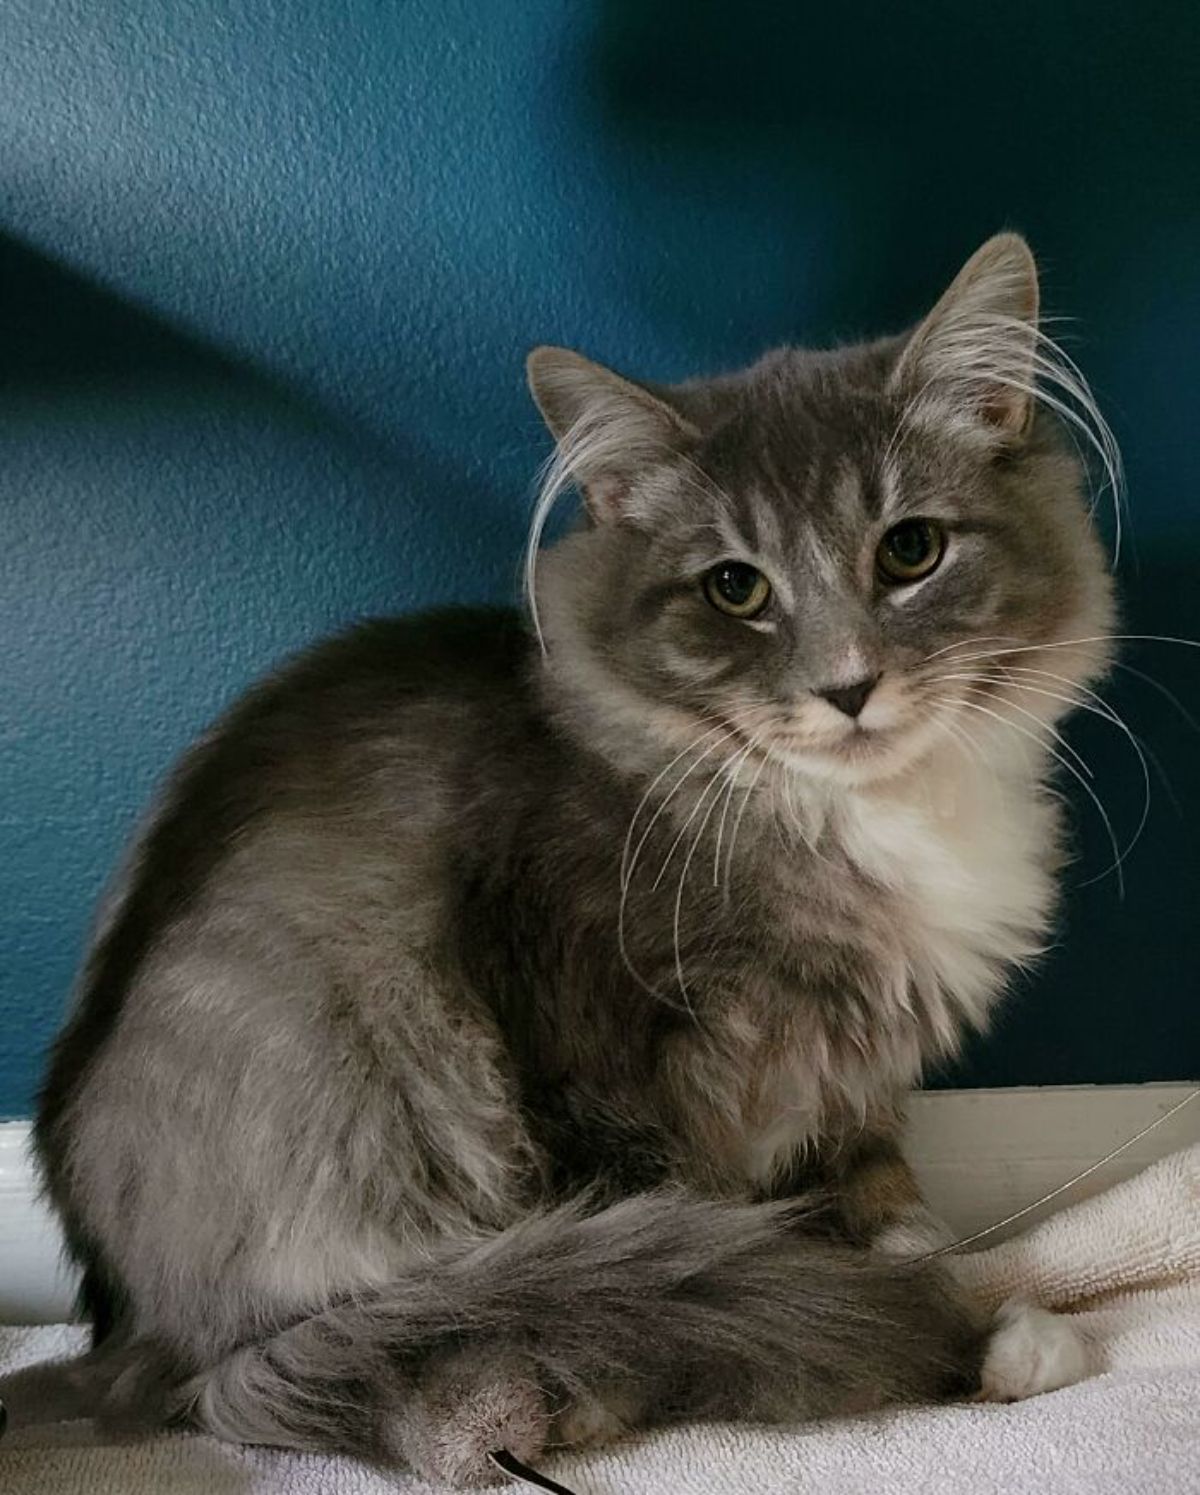 fluffy grey cat with white chest sitting on a white towel